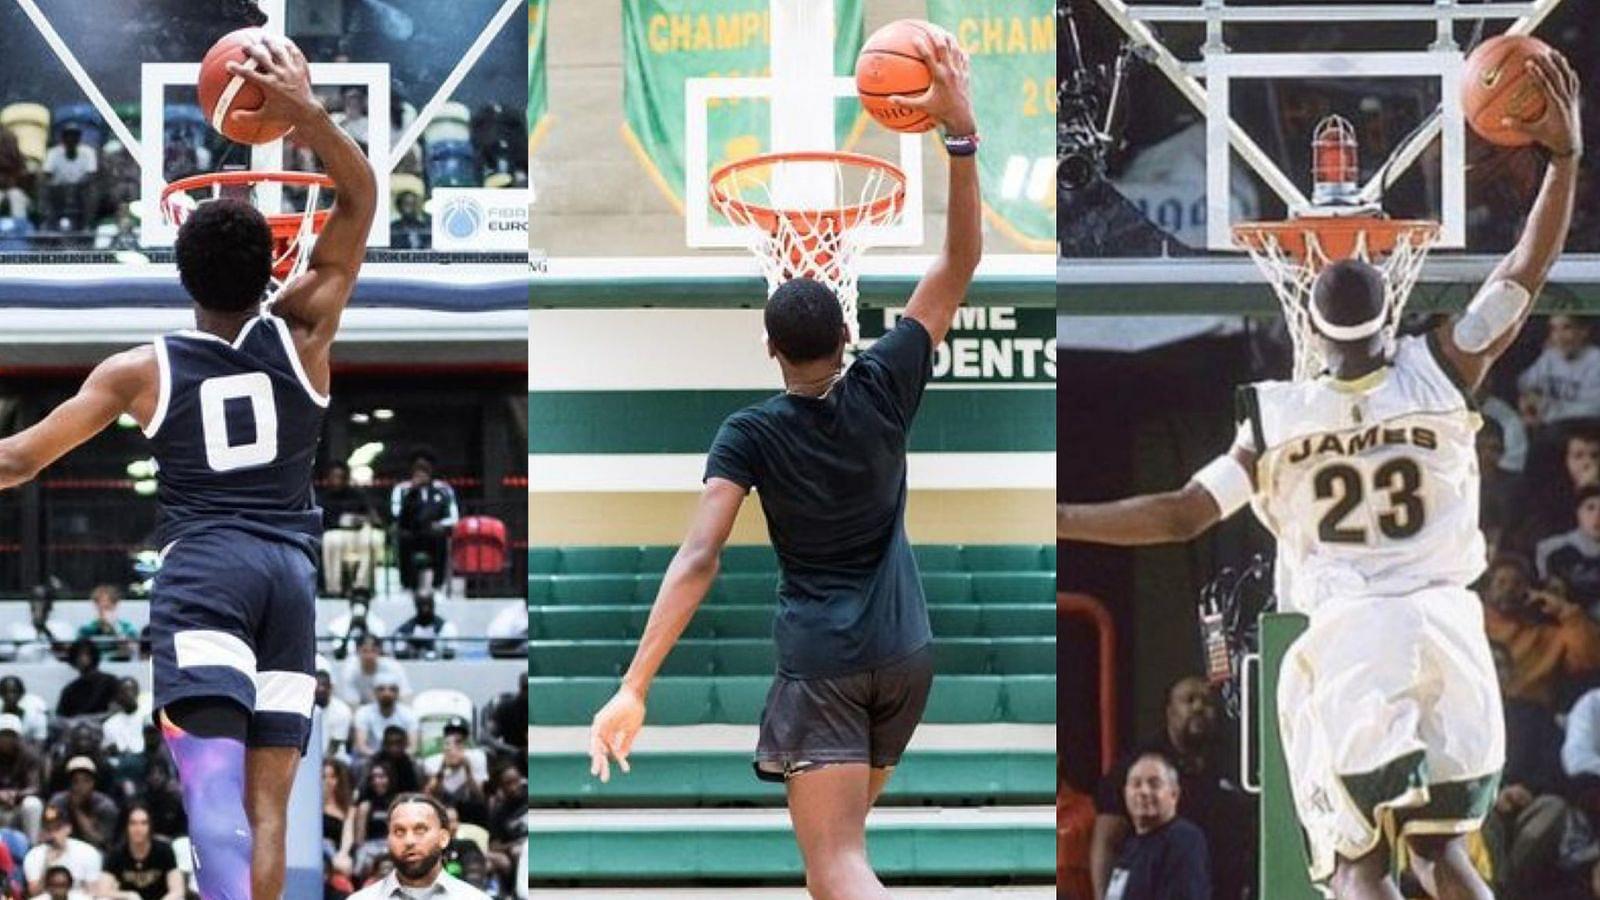 "Bronny James got his bounce, Bryce got his height": LeBron James and sons light up social media with astonishing resemblance in their games